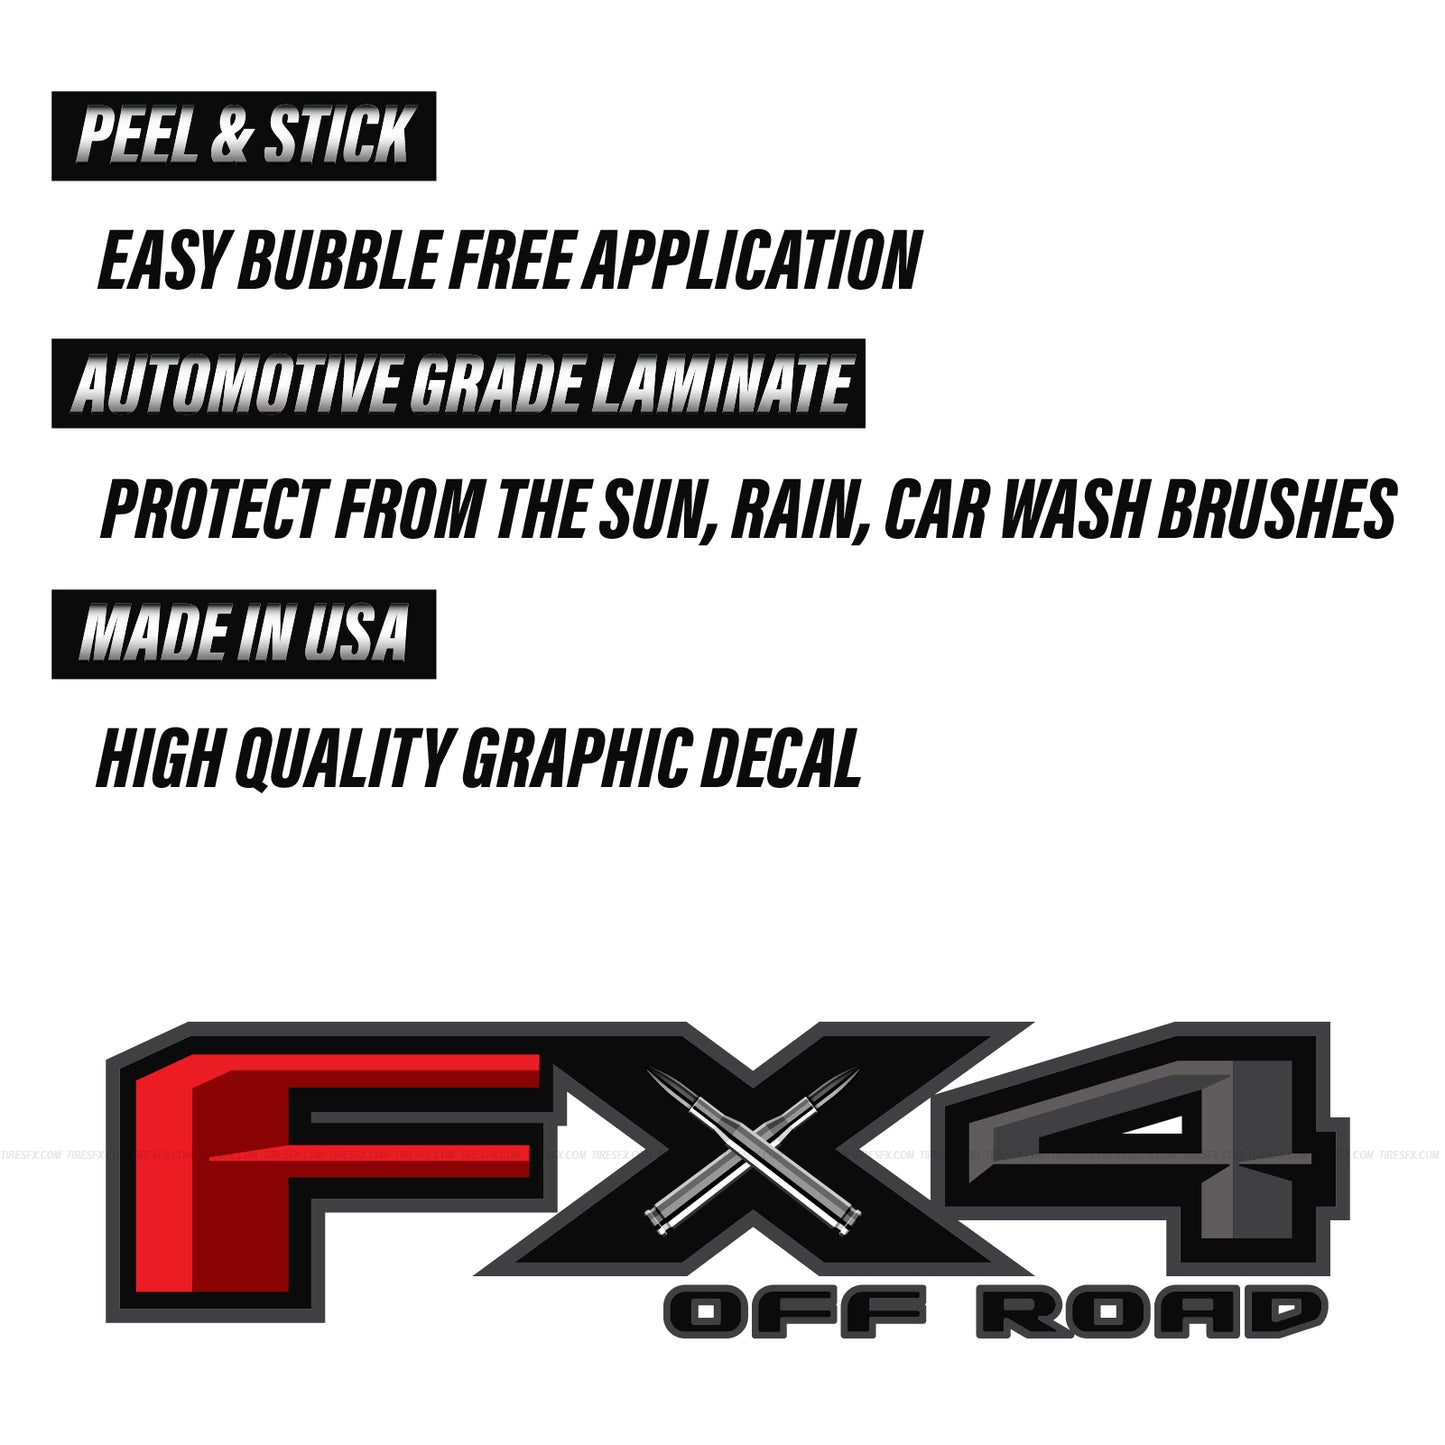 FX4 Off Road Bullets Decal Replacement Sticker Ford F 150 Bedside Emblem for 4x4 Truck Super Duty